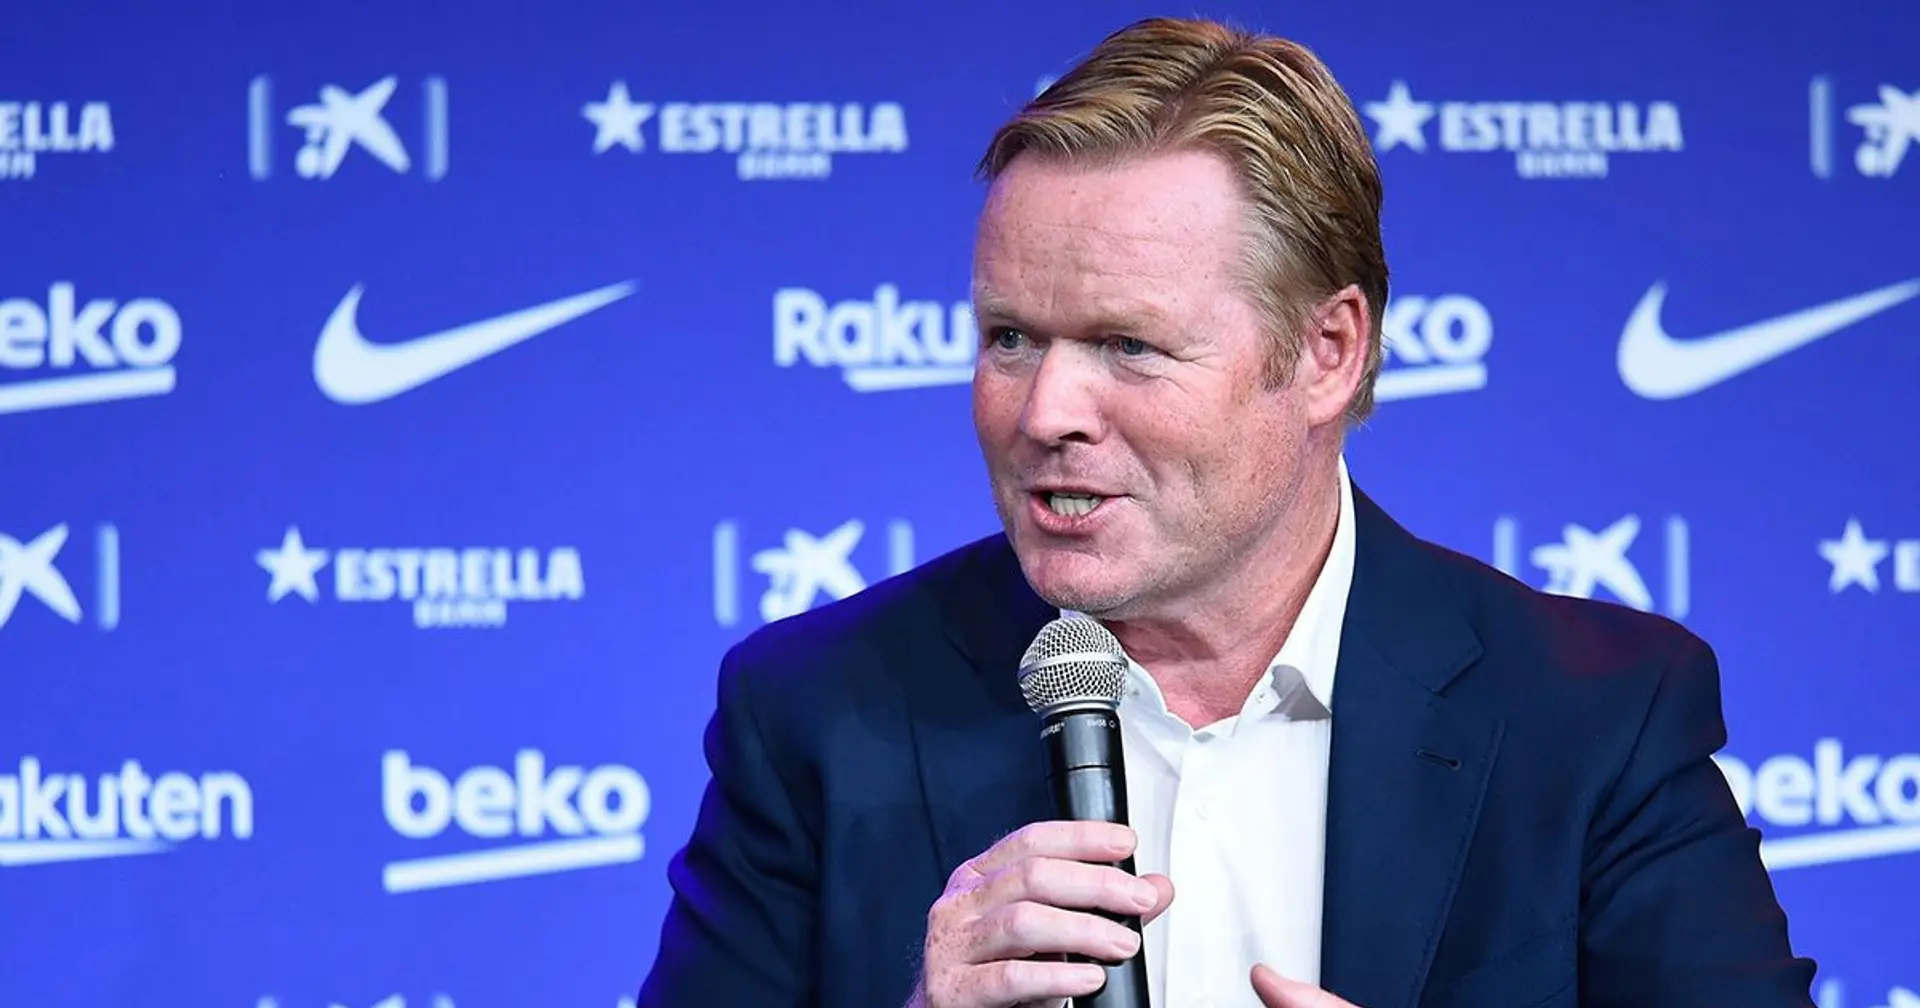 Ronald Koeman: ‘It’s true that Laporta tried signing me to Barca in 2003’